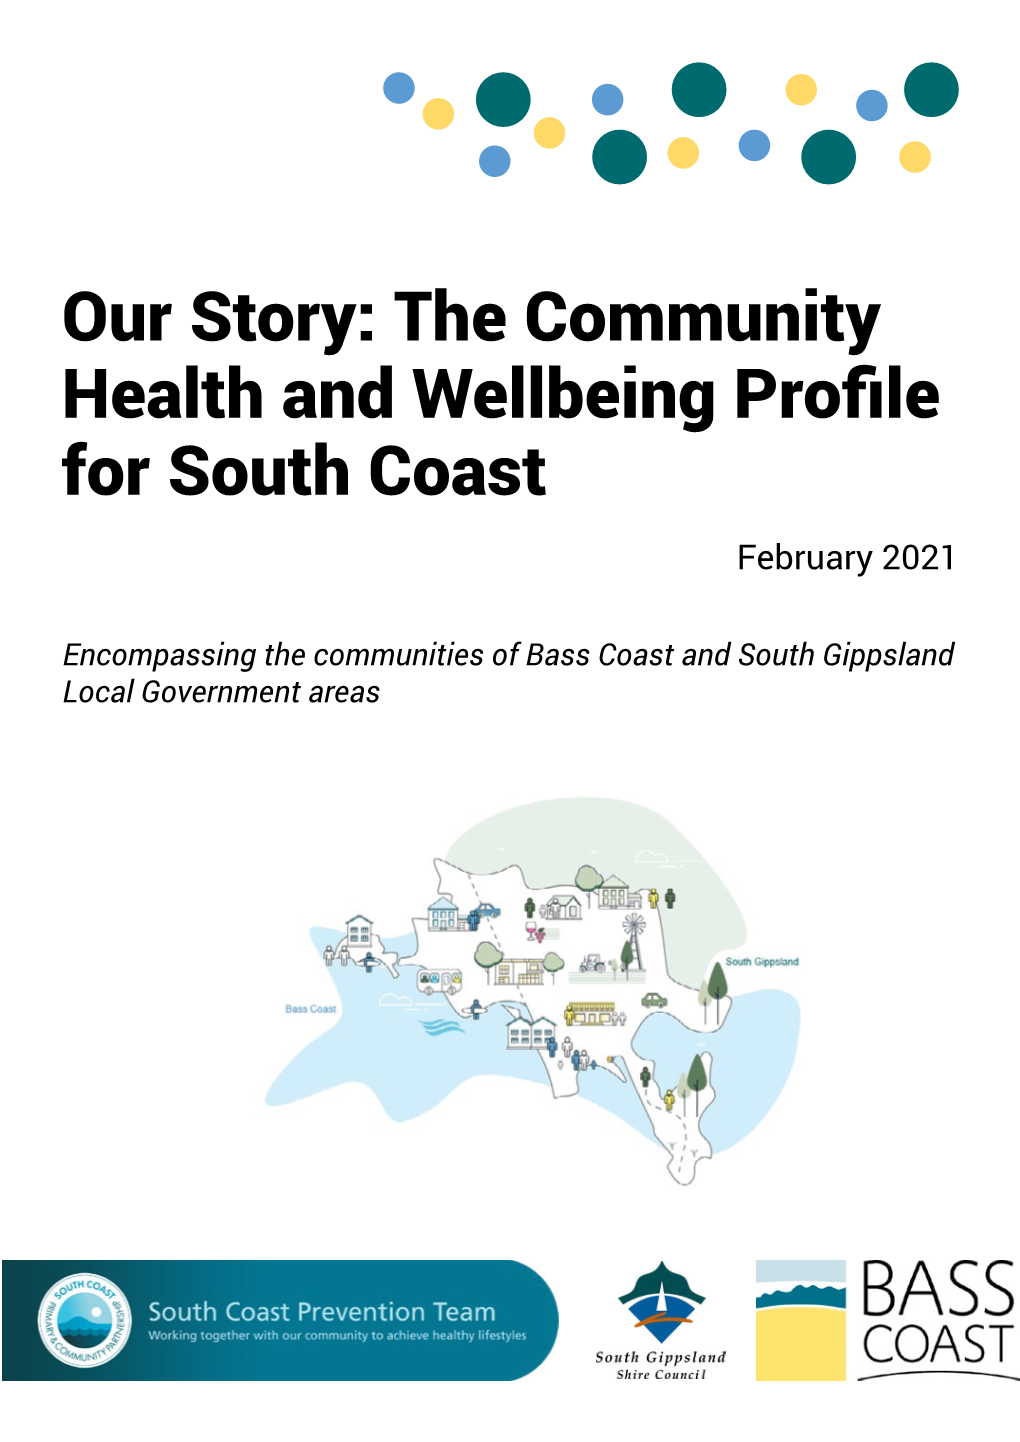 Our Story: the Community Health and Wellbeing Profile for South Coast February 2021